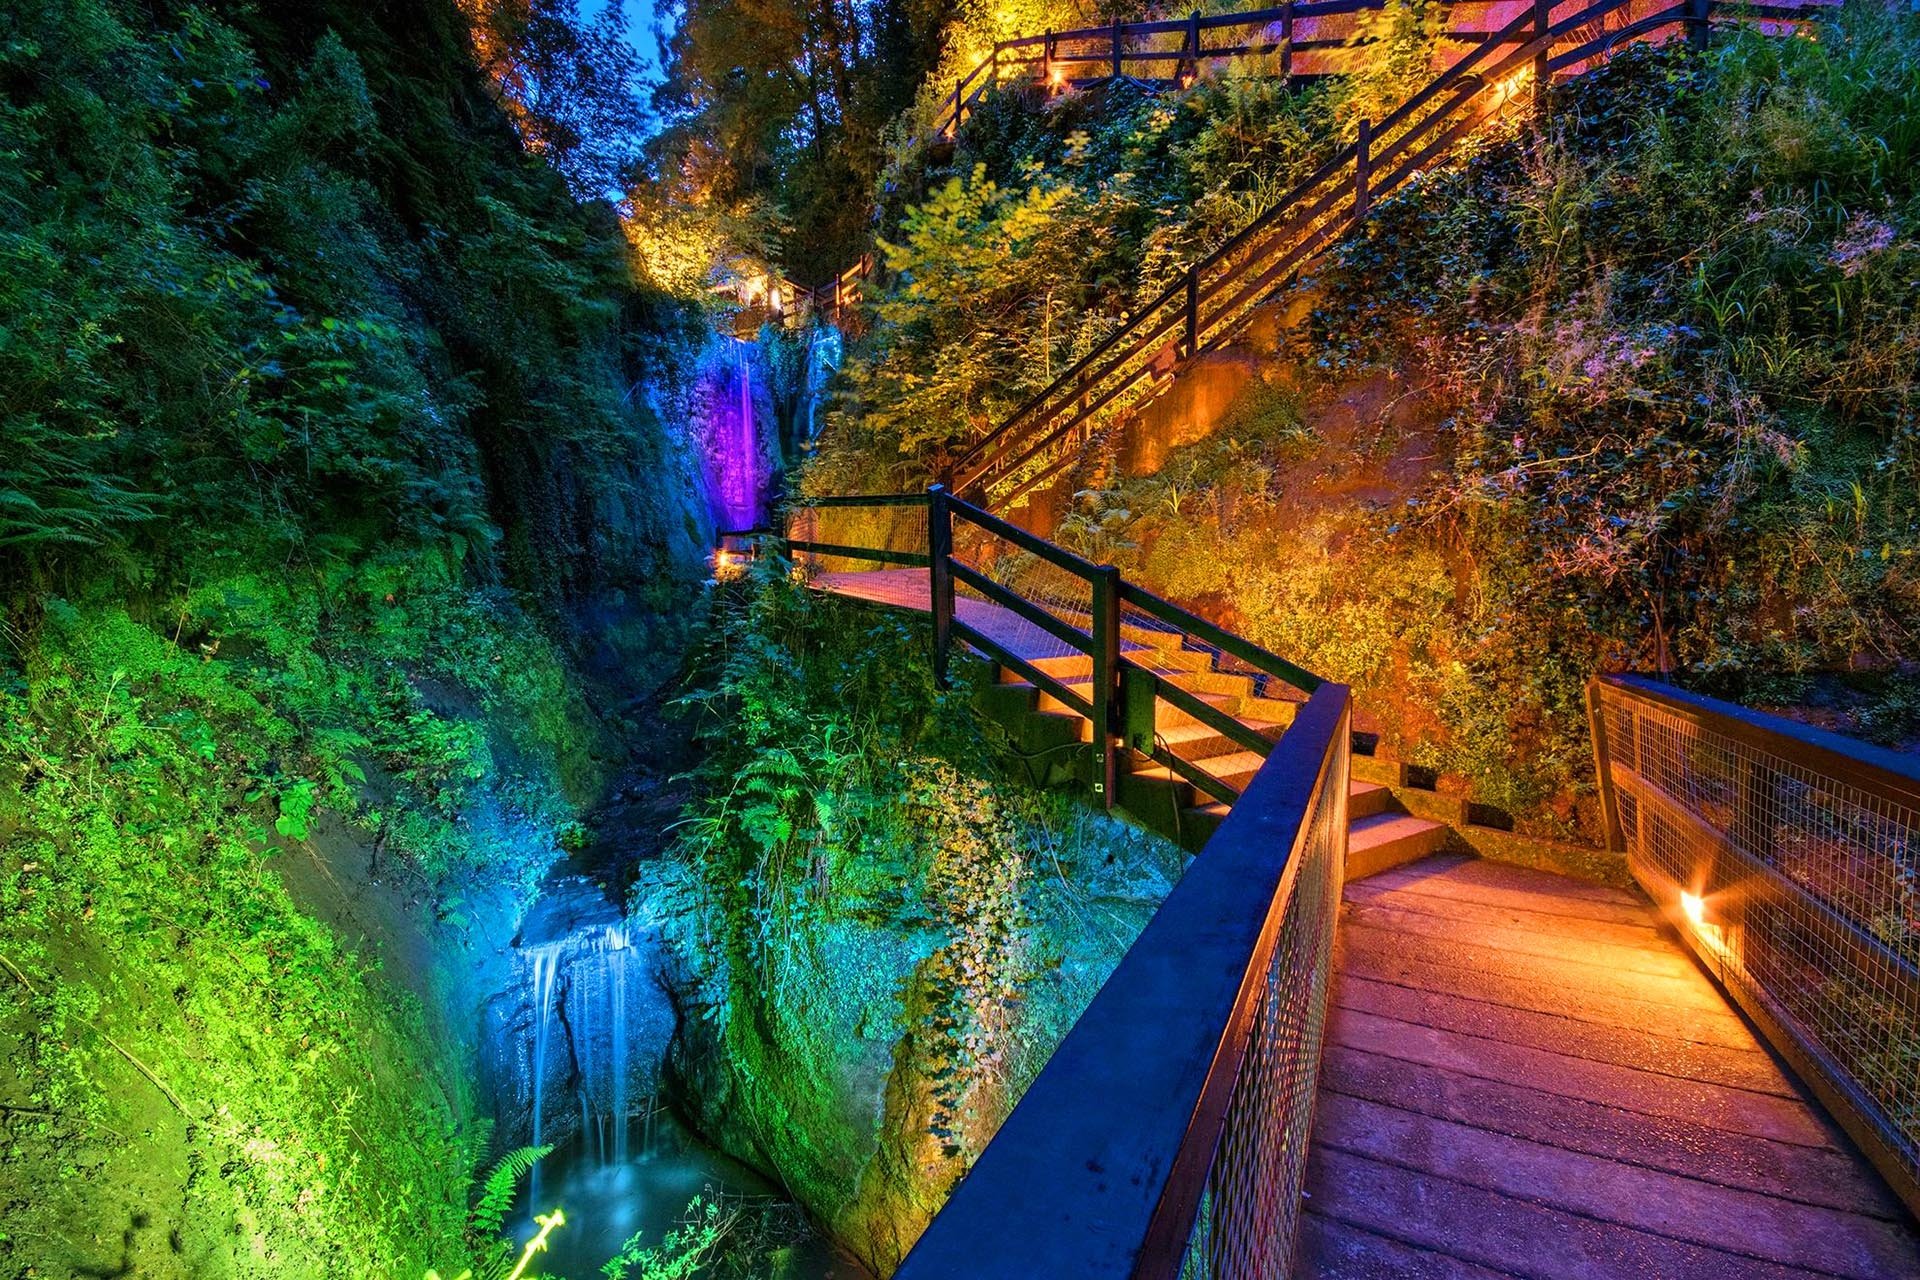 Image of Shanklin Chine